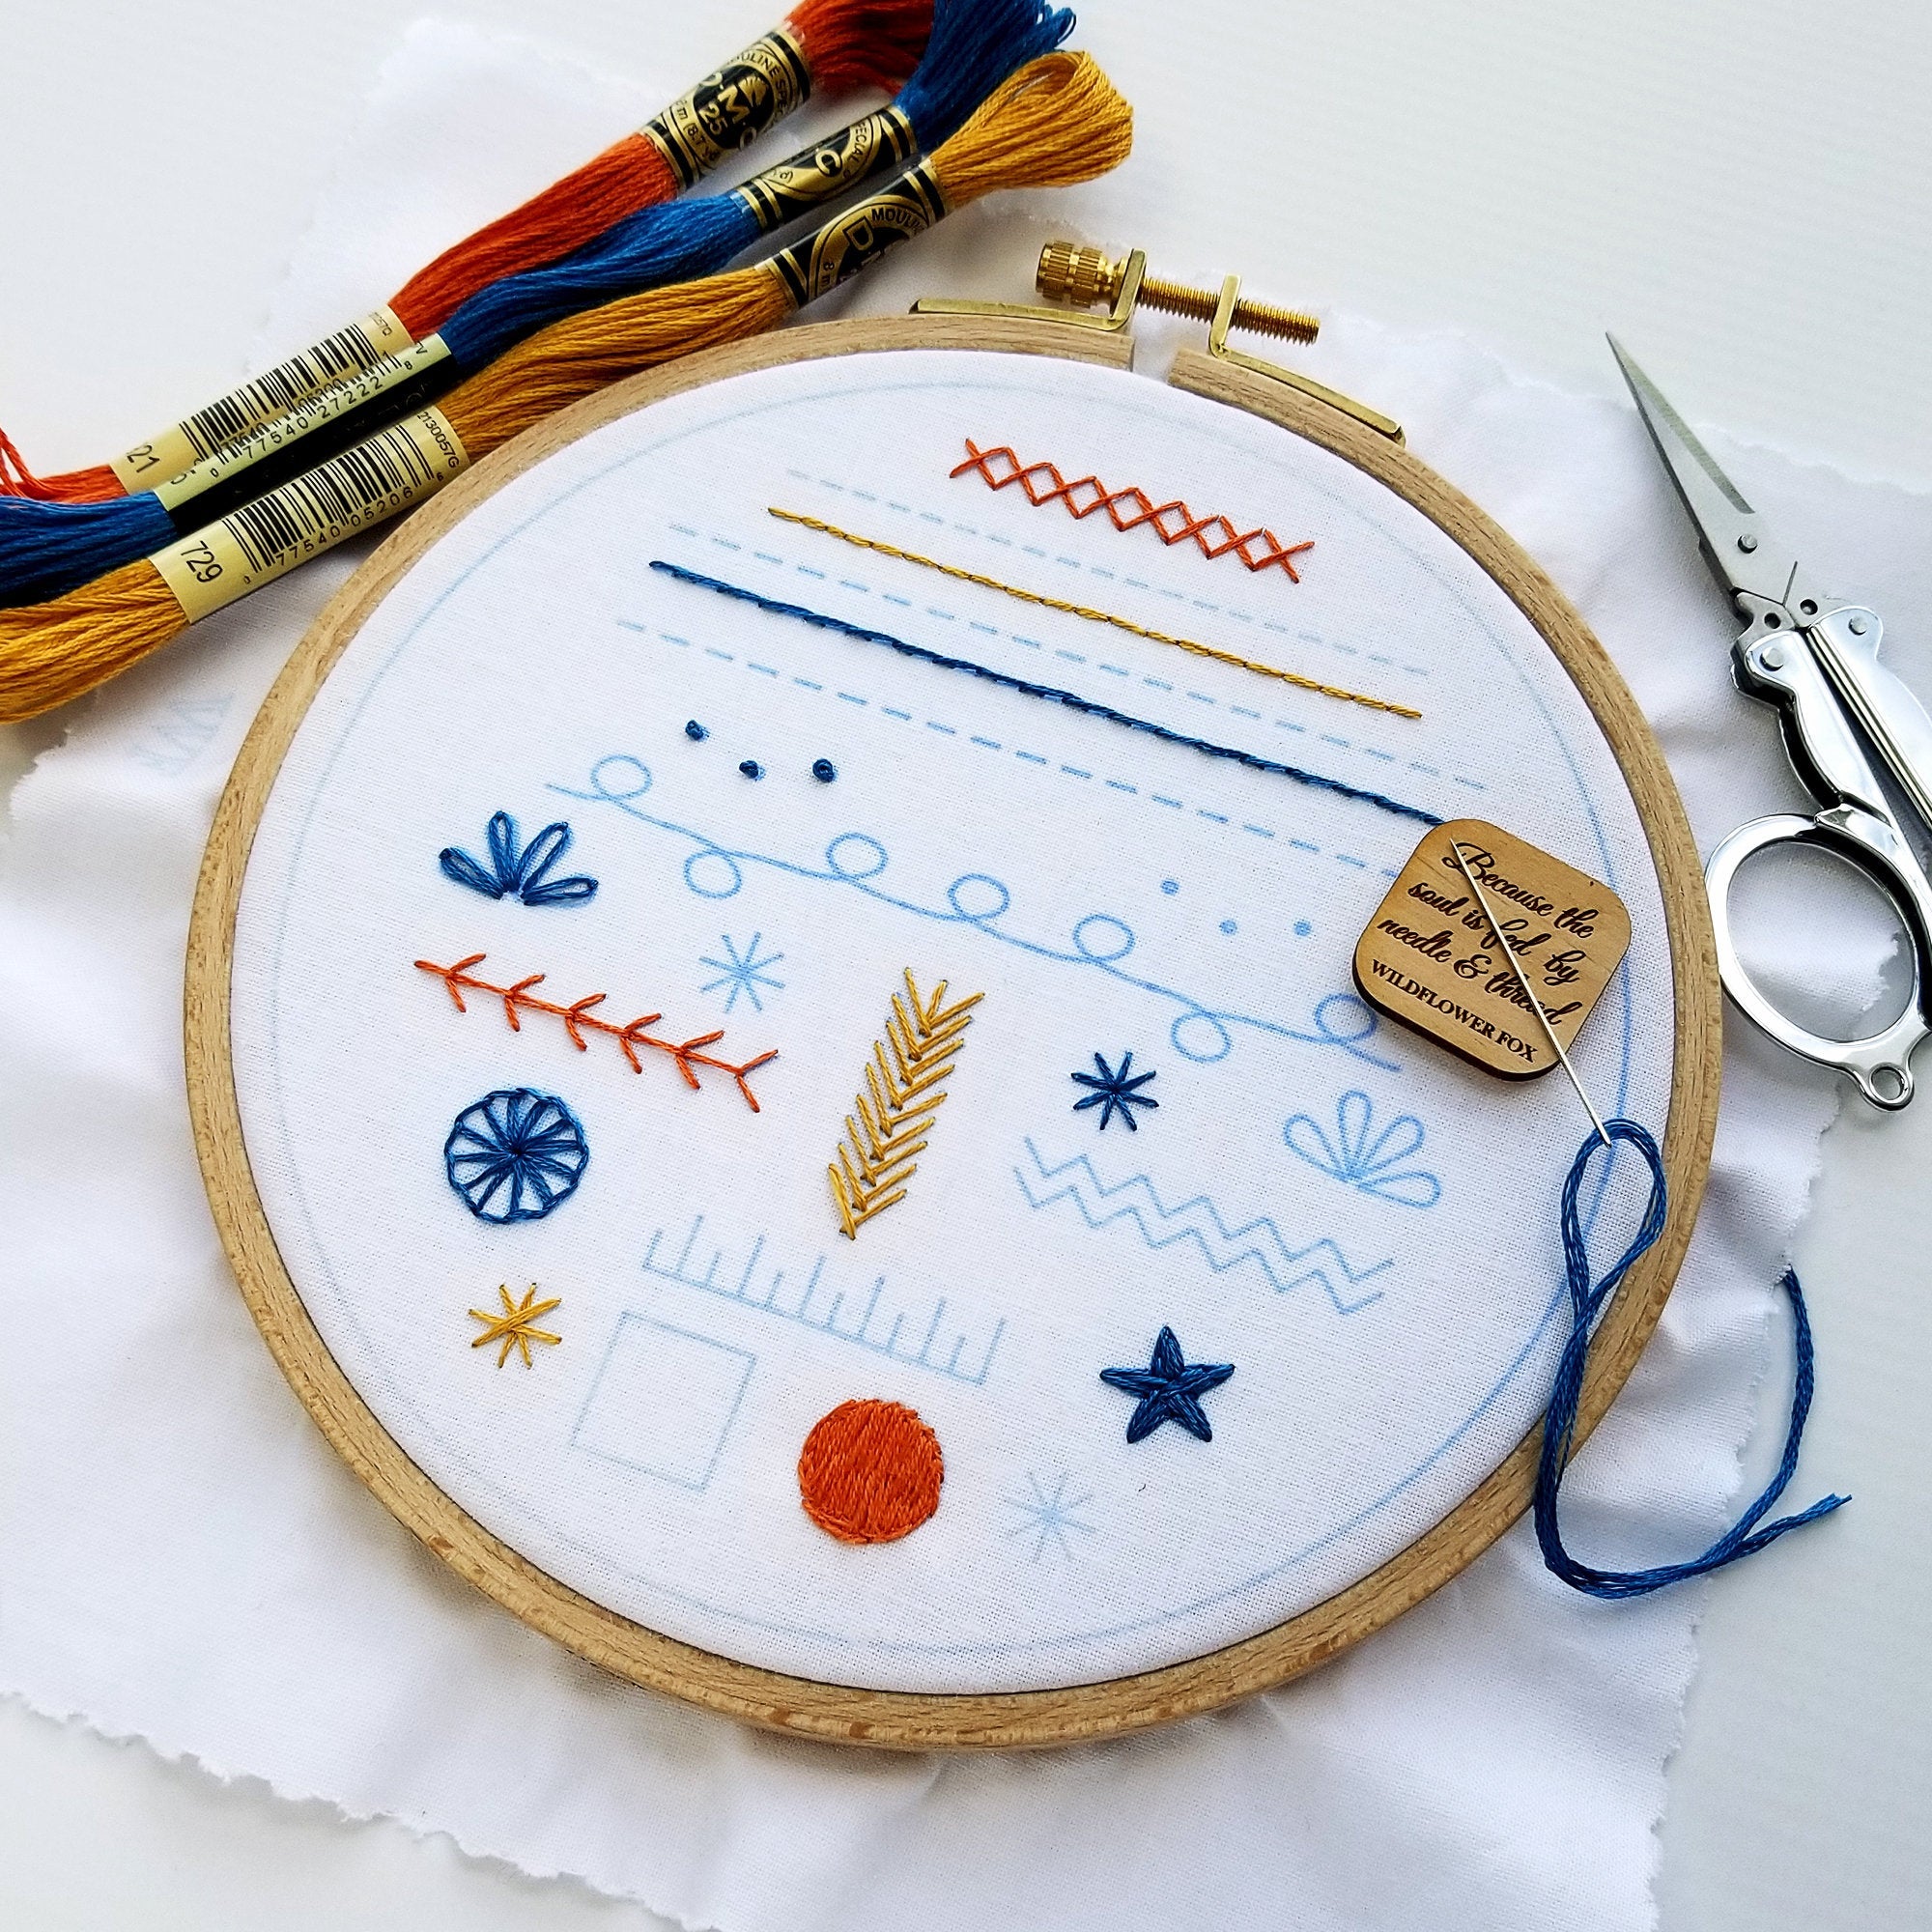 Beginners Embroidery Stitch Practice Kit Bamboo Embroidery Hoop Seam Ripper  Set for Craft Lover Hand Stitch Embroidery Sets